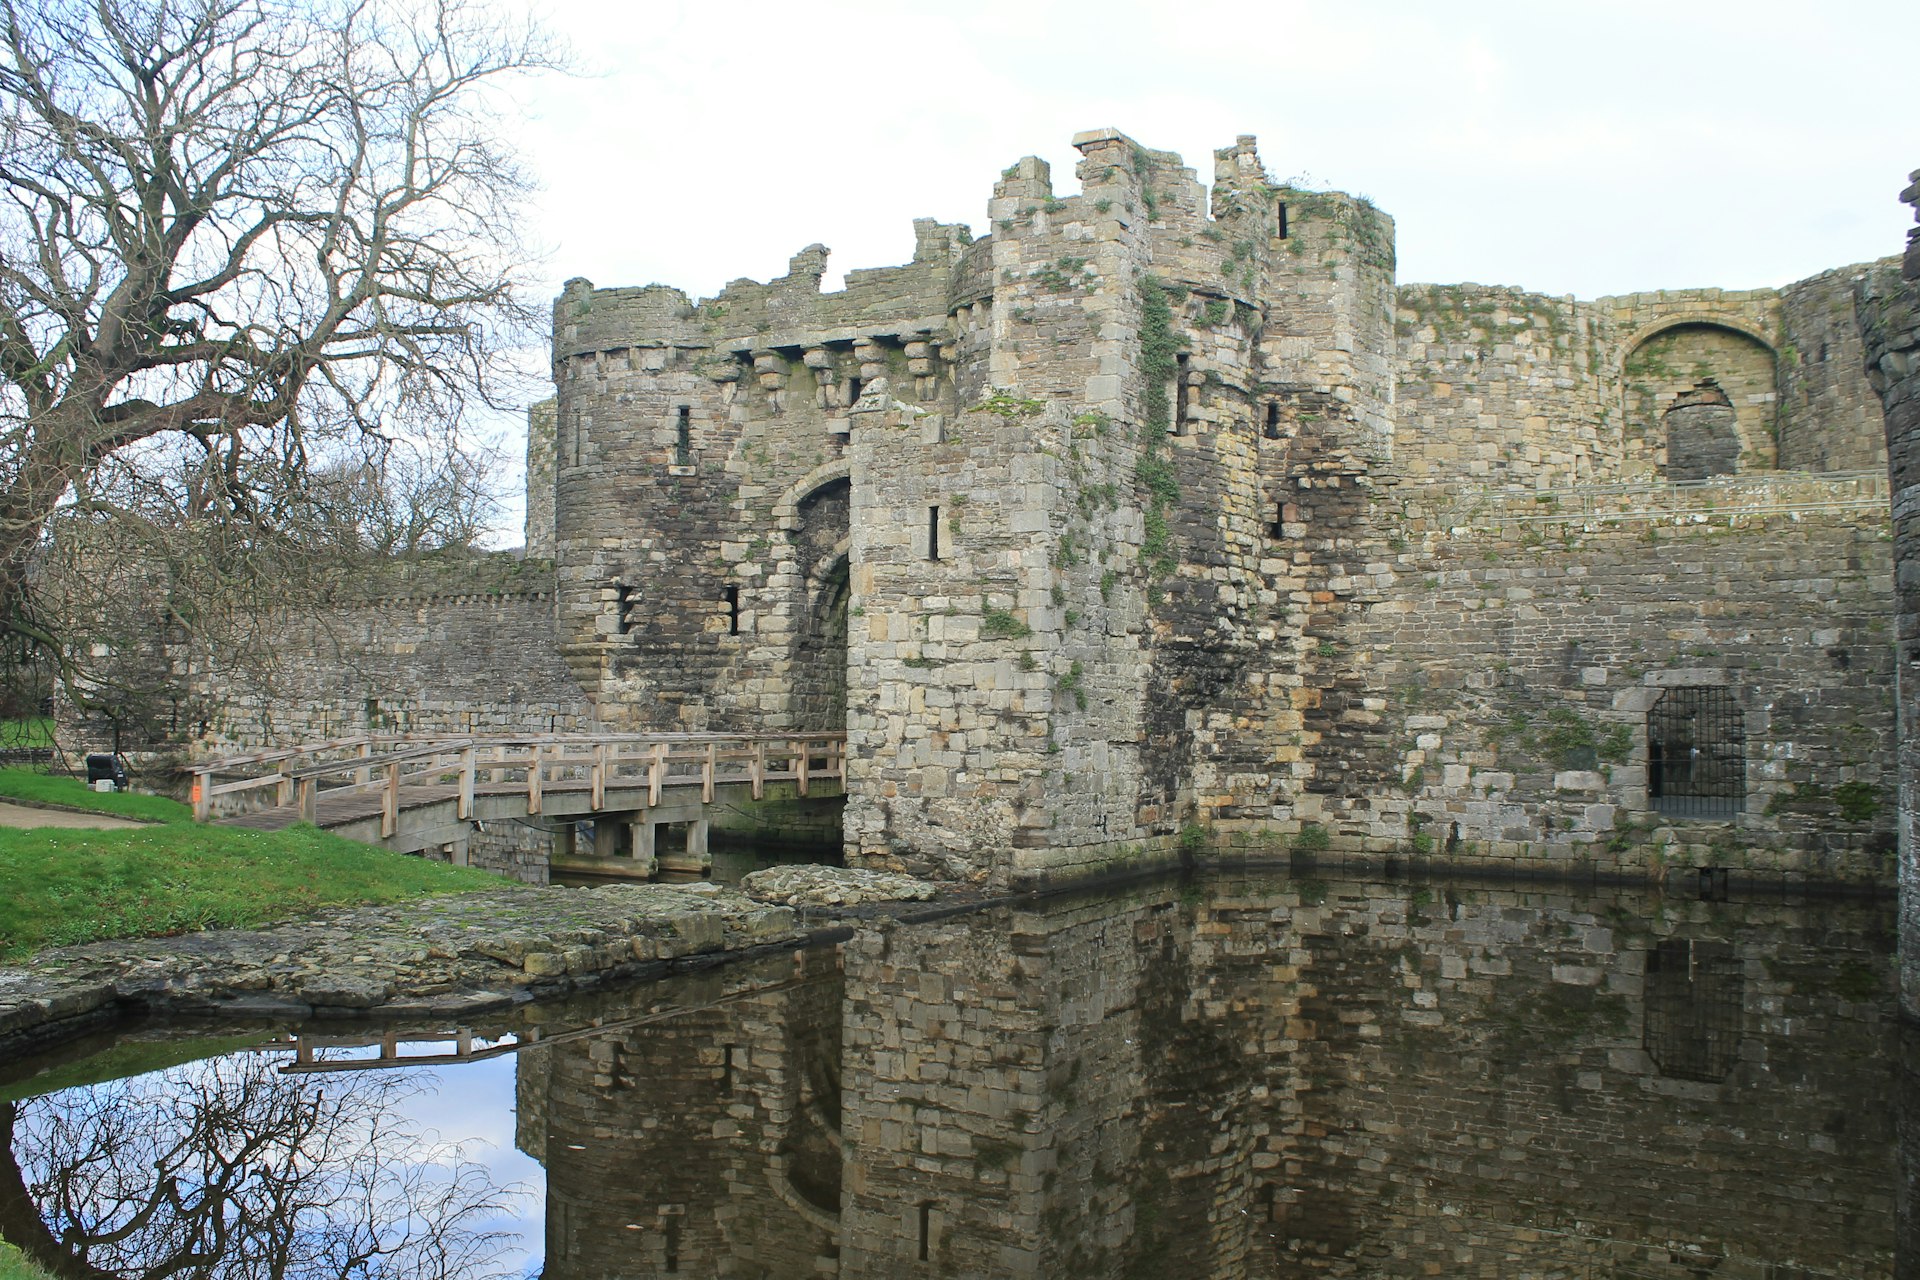 The entrance gate to Beaumaris Castle in Anglsey, a large, unfinished castle that's surrounded by a moat.